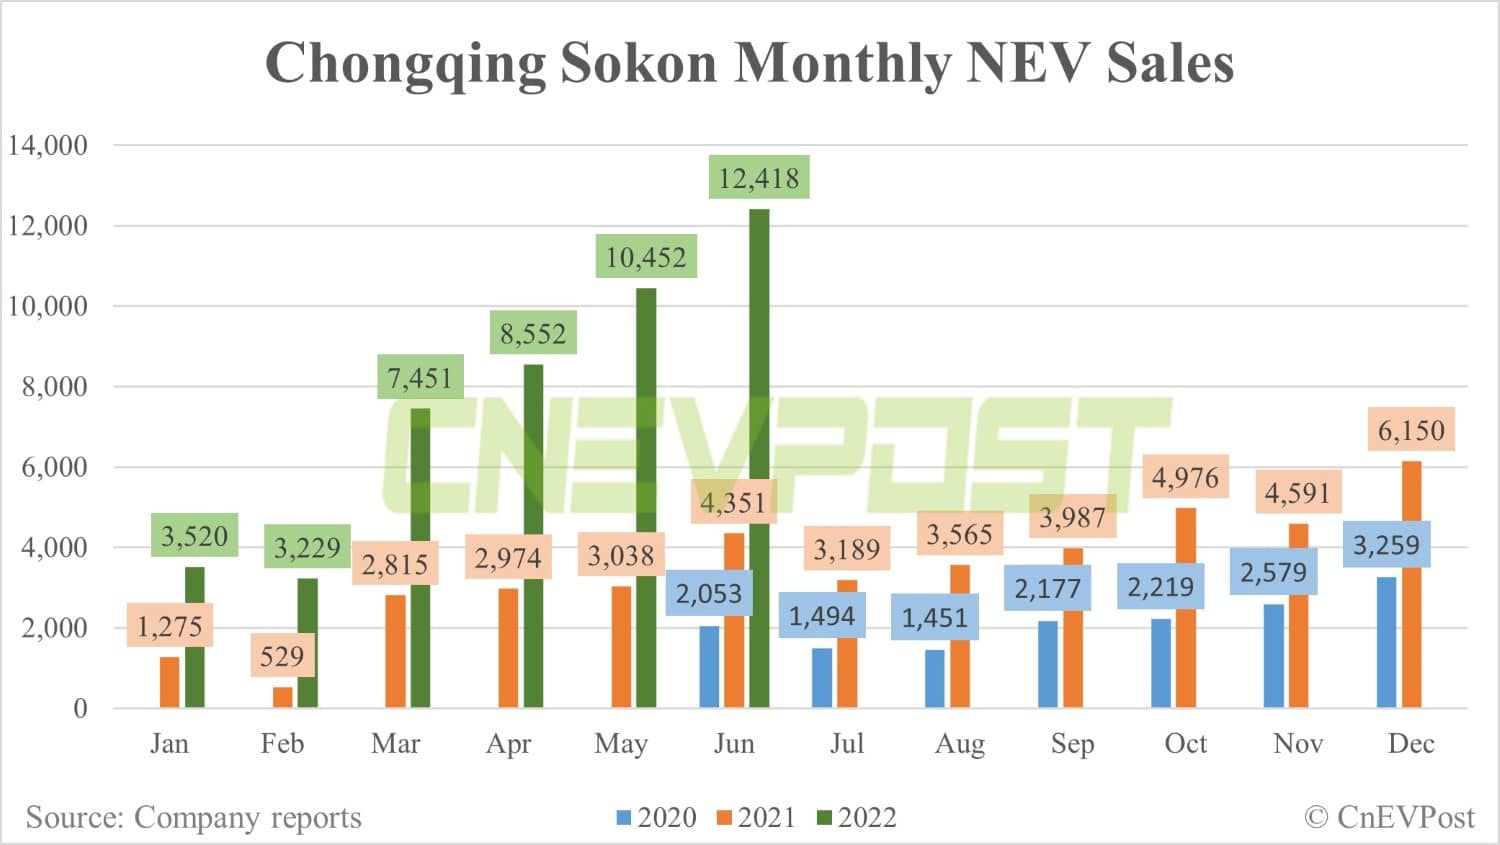 Chongqing Sokon sells record 12,418 NEVs in June, up 18.8% from May-CnEVPost